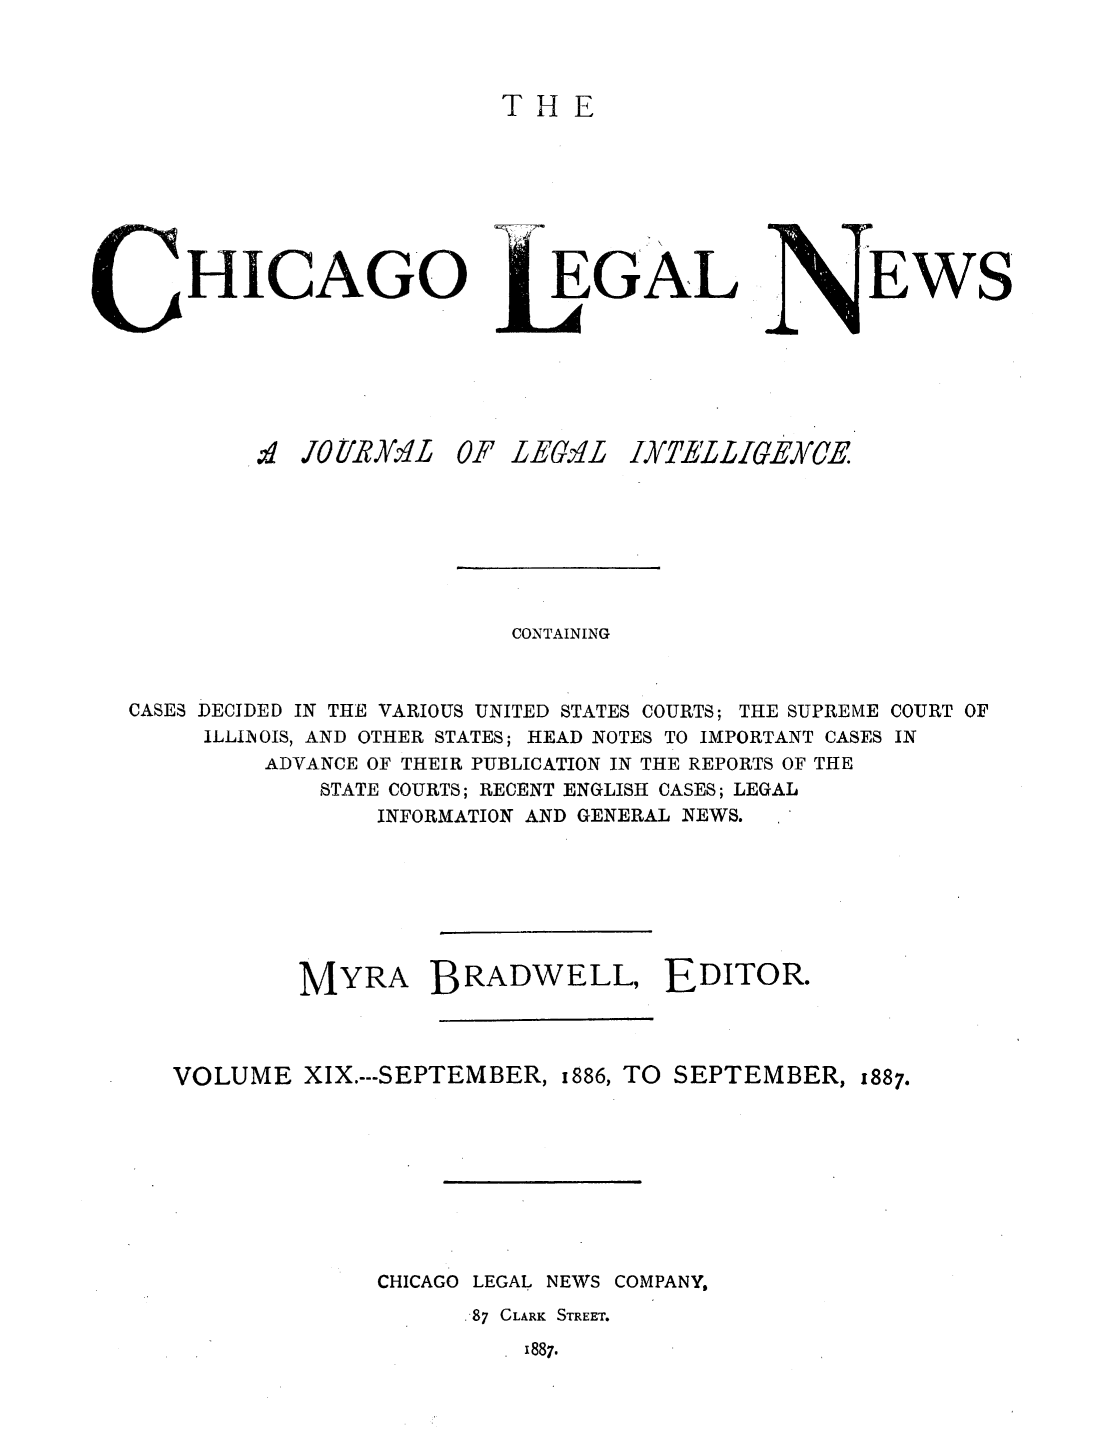 handle is hein.journals/chiclene19 and id is 1 raw text is: THEHICAGOd J0&g~RY'71L 0EGALIF LE.2ILEWSCONTAININGCASES DECIDED IN THE VARIOUS UNITED STATES COURTS; THE SUPREME COURT OFILLIAOIS, AND OTHER STATES; HEAD NOTES TO IMPORTANT CASES INADVANCE OF THEIR PUBLICATION IN THE REPORTS OF THESTATE COURTS; RECENT ENGLISH CASES; LEGALINFORMATION AND GENERAL NEWS.MYRA BRADWELL, EDITOR.VOLUME XIX.---SEPTEMBER, 1886, TO SEPTEMBER, 1887.CHICAGO LEGAL NEWS COMPANY,.87 CLARK STREET.1887.IXTELLIGEXE